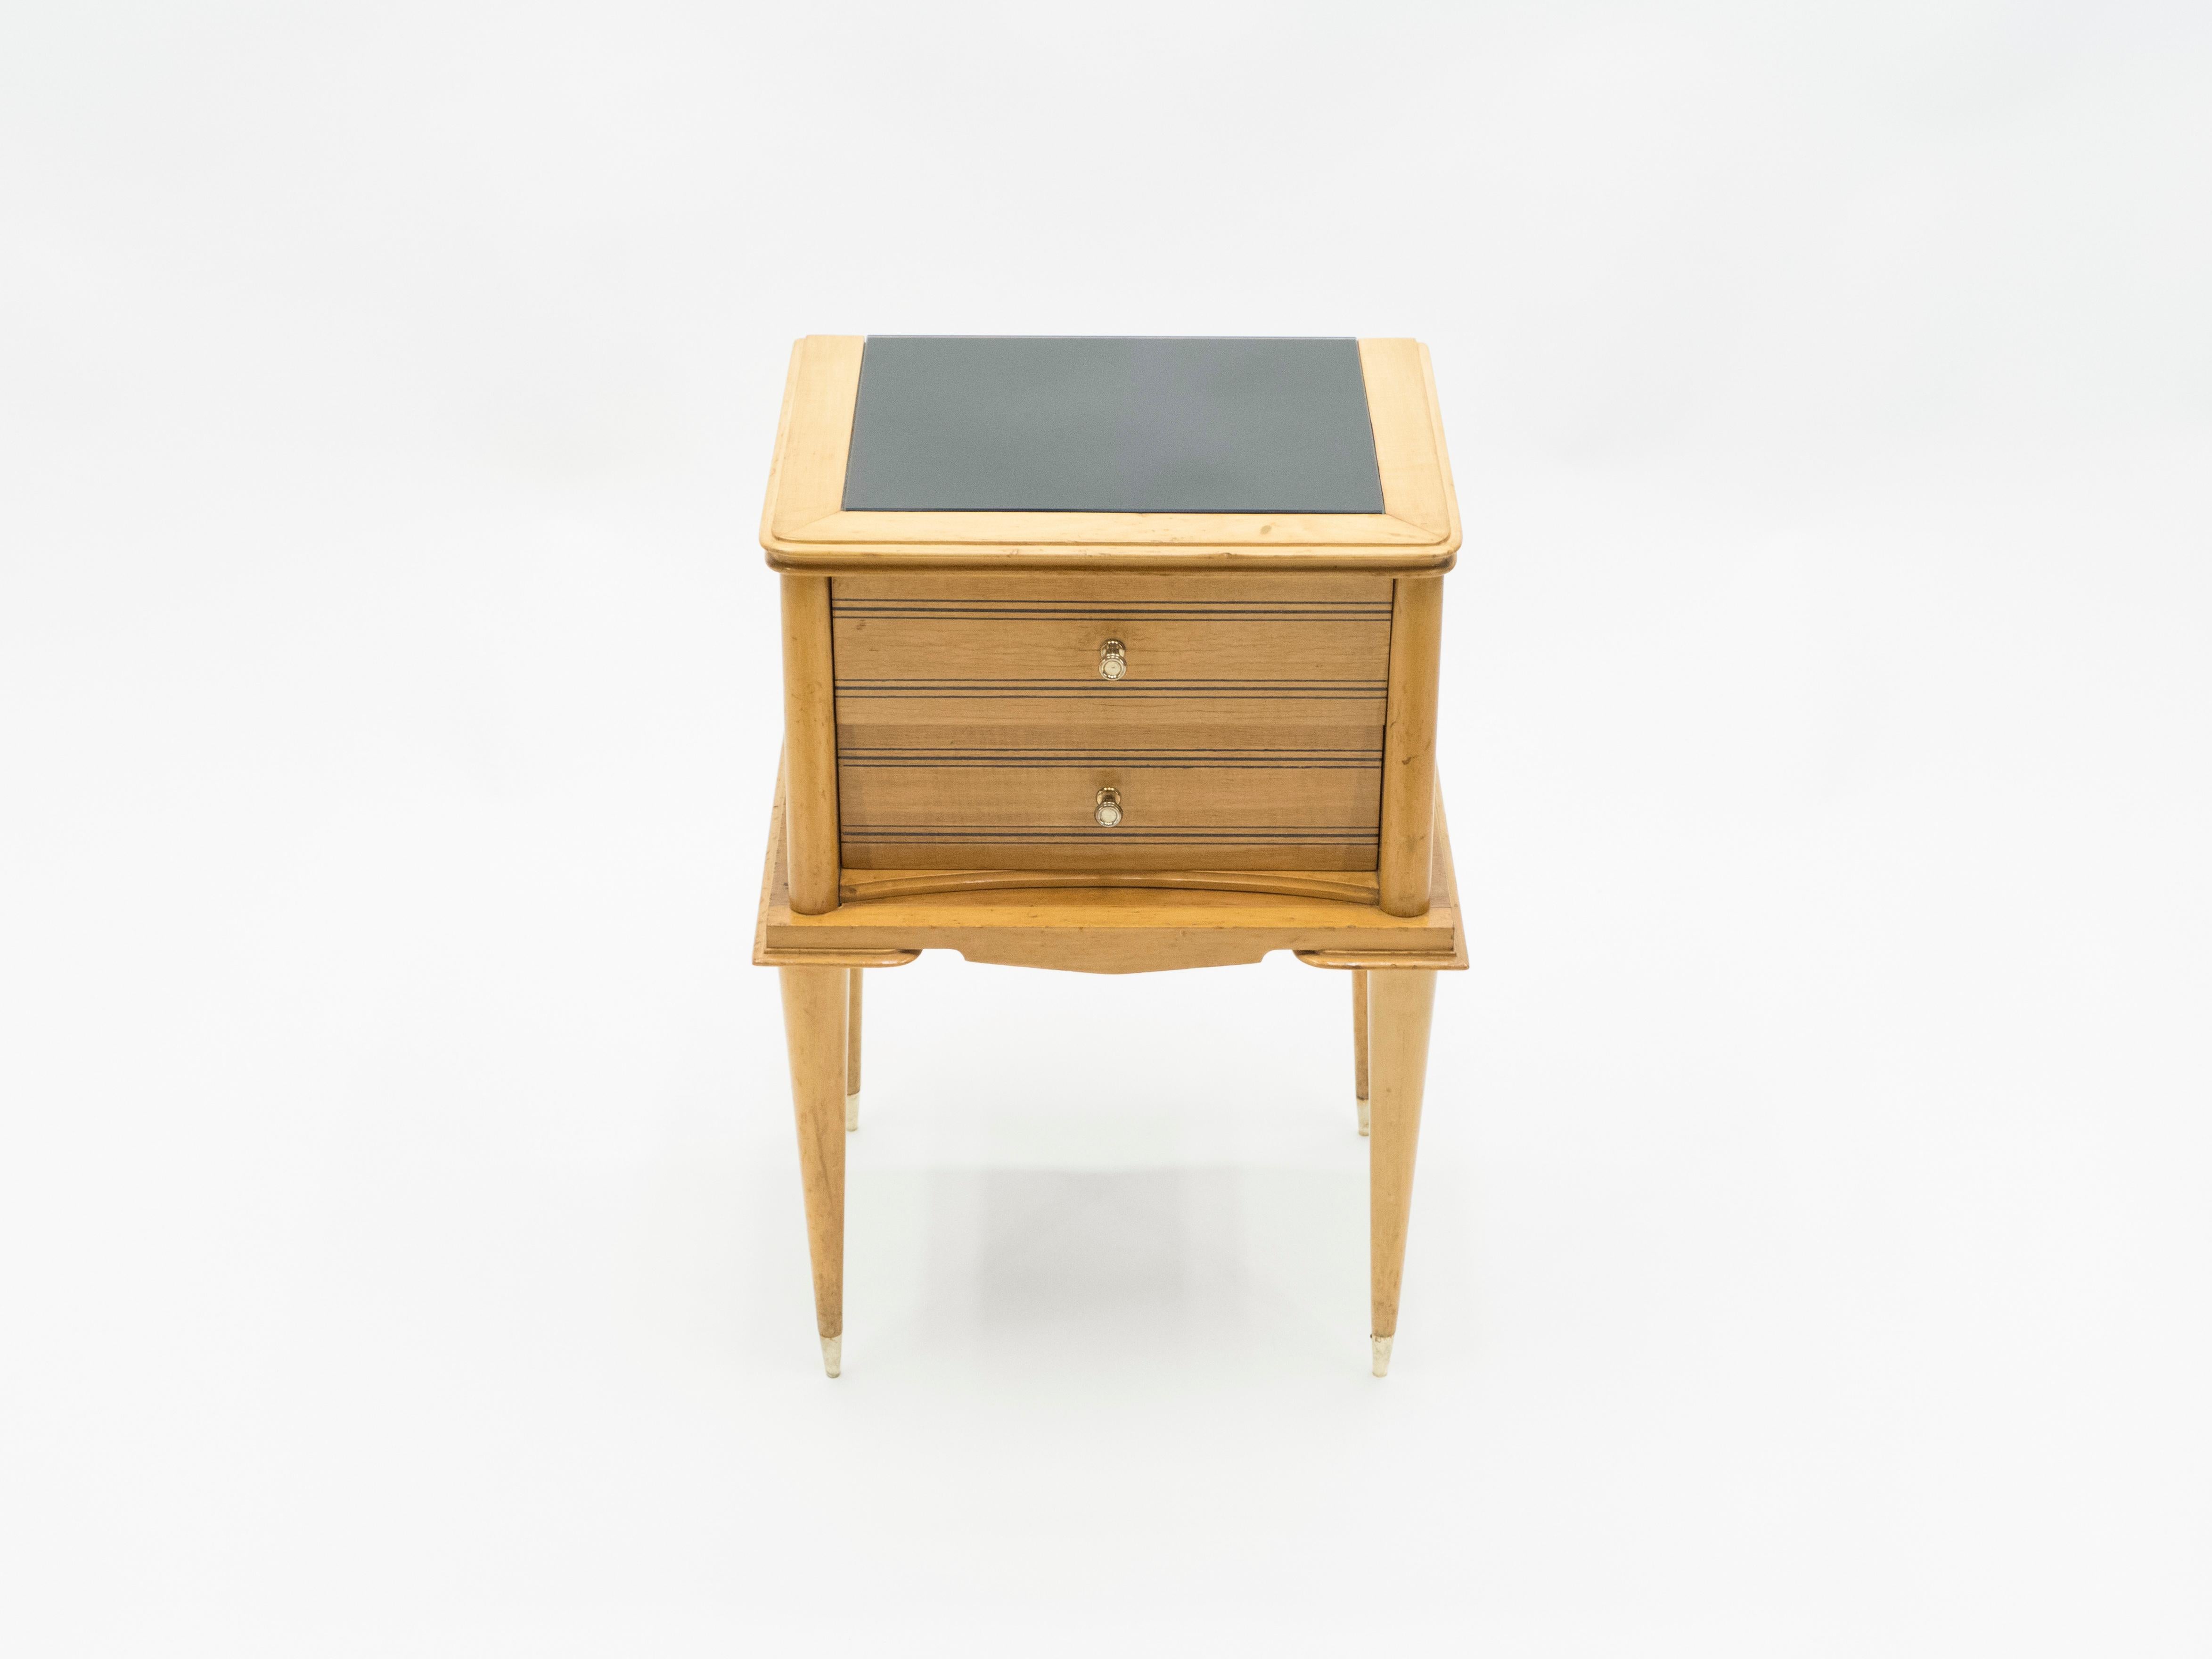 Brass French Sycamore Nightstands 2 Drawers Attributed to Suzanne Guiguichon, 1950s For Sale